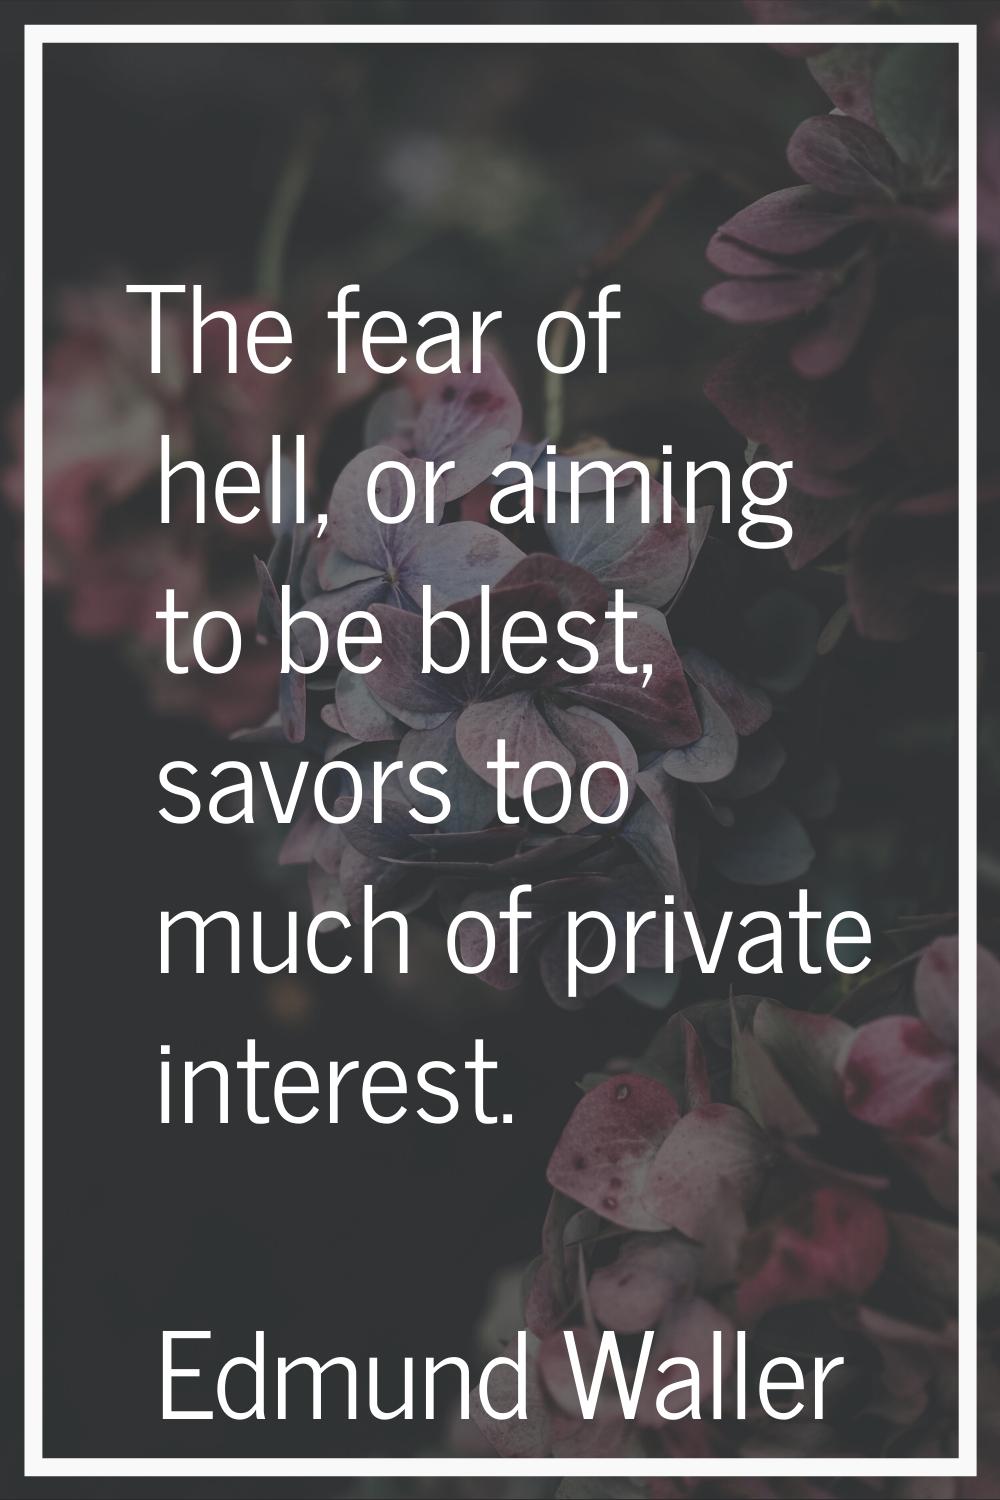 The fear of hell, or aiming to be blest, savors too much of private interest.